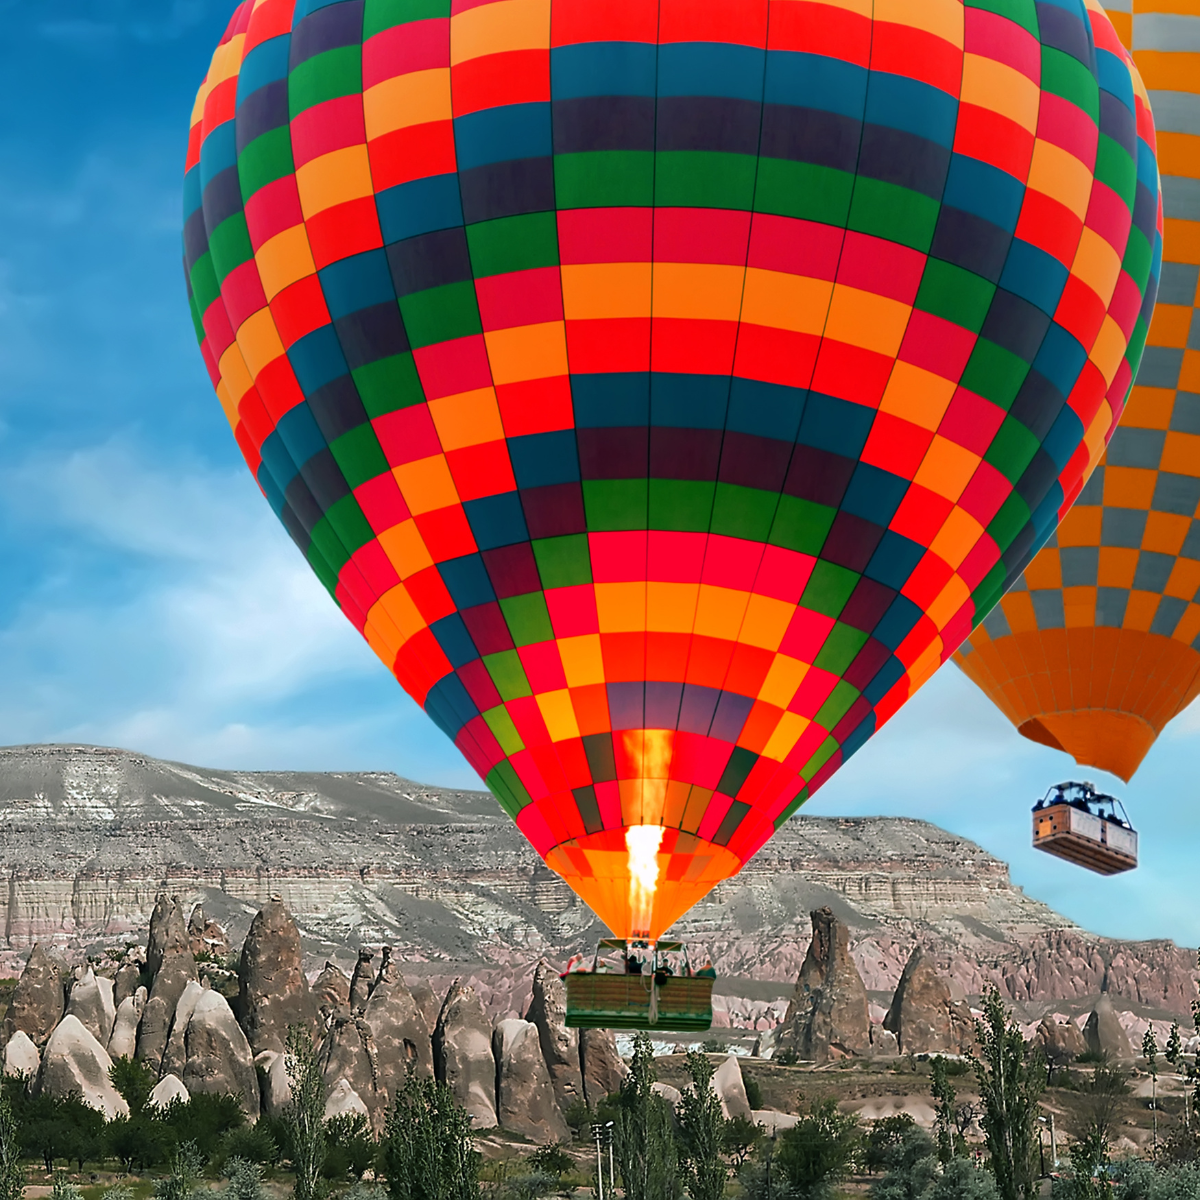 11. Take Your Love to New Heights with a Romantic Hot Air Balloon Ride